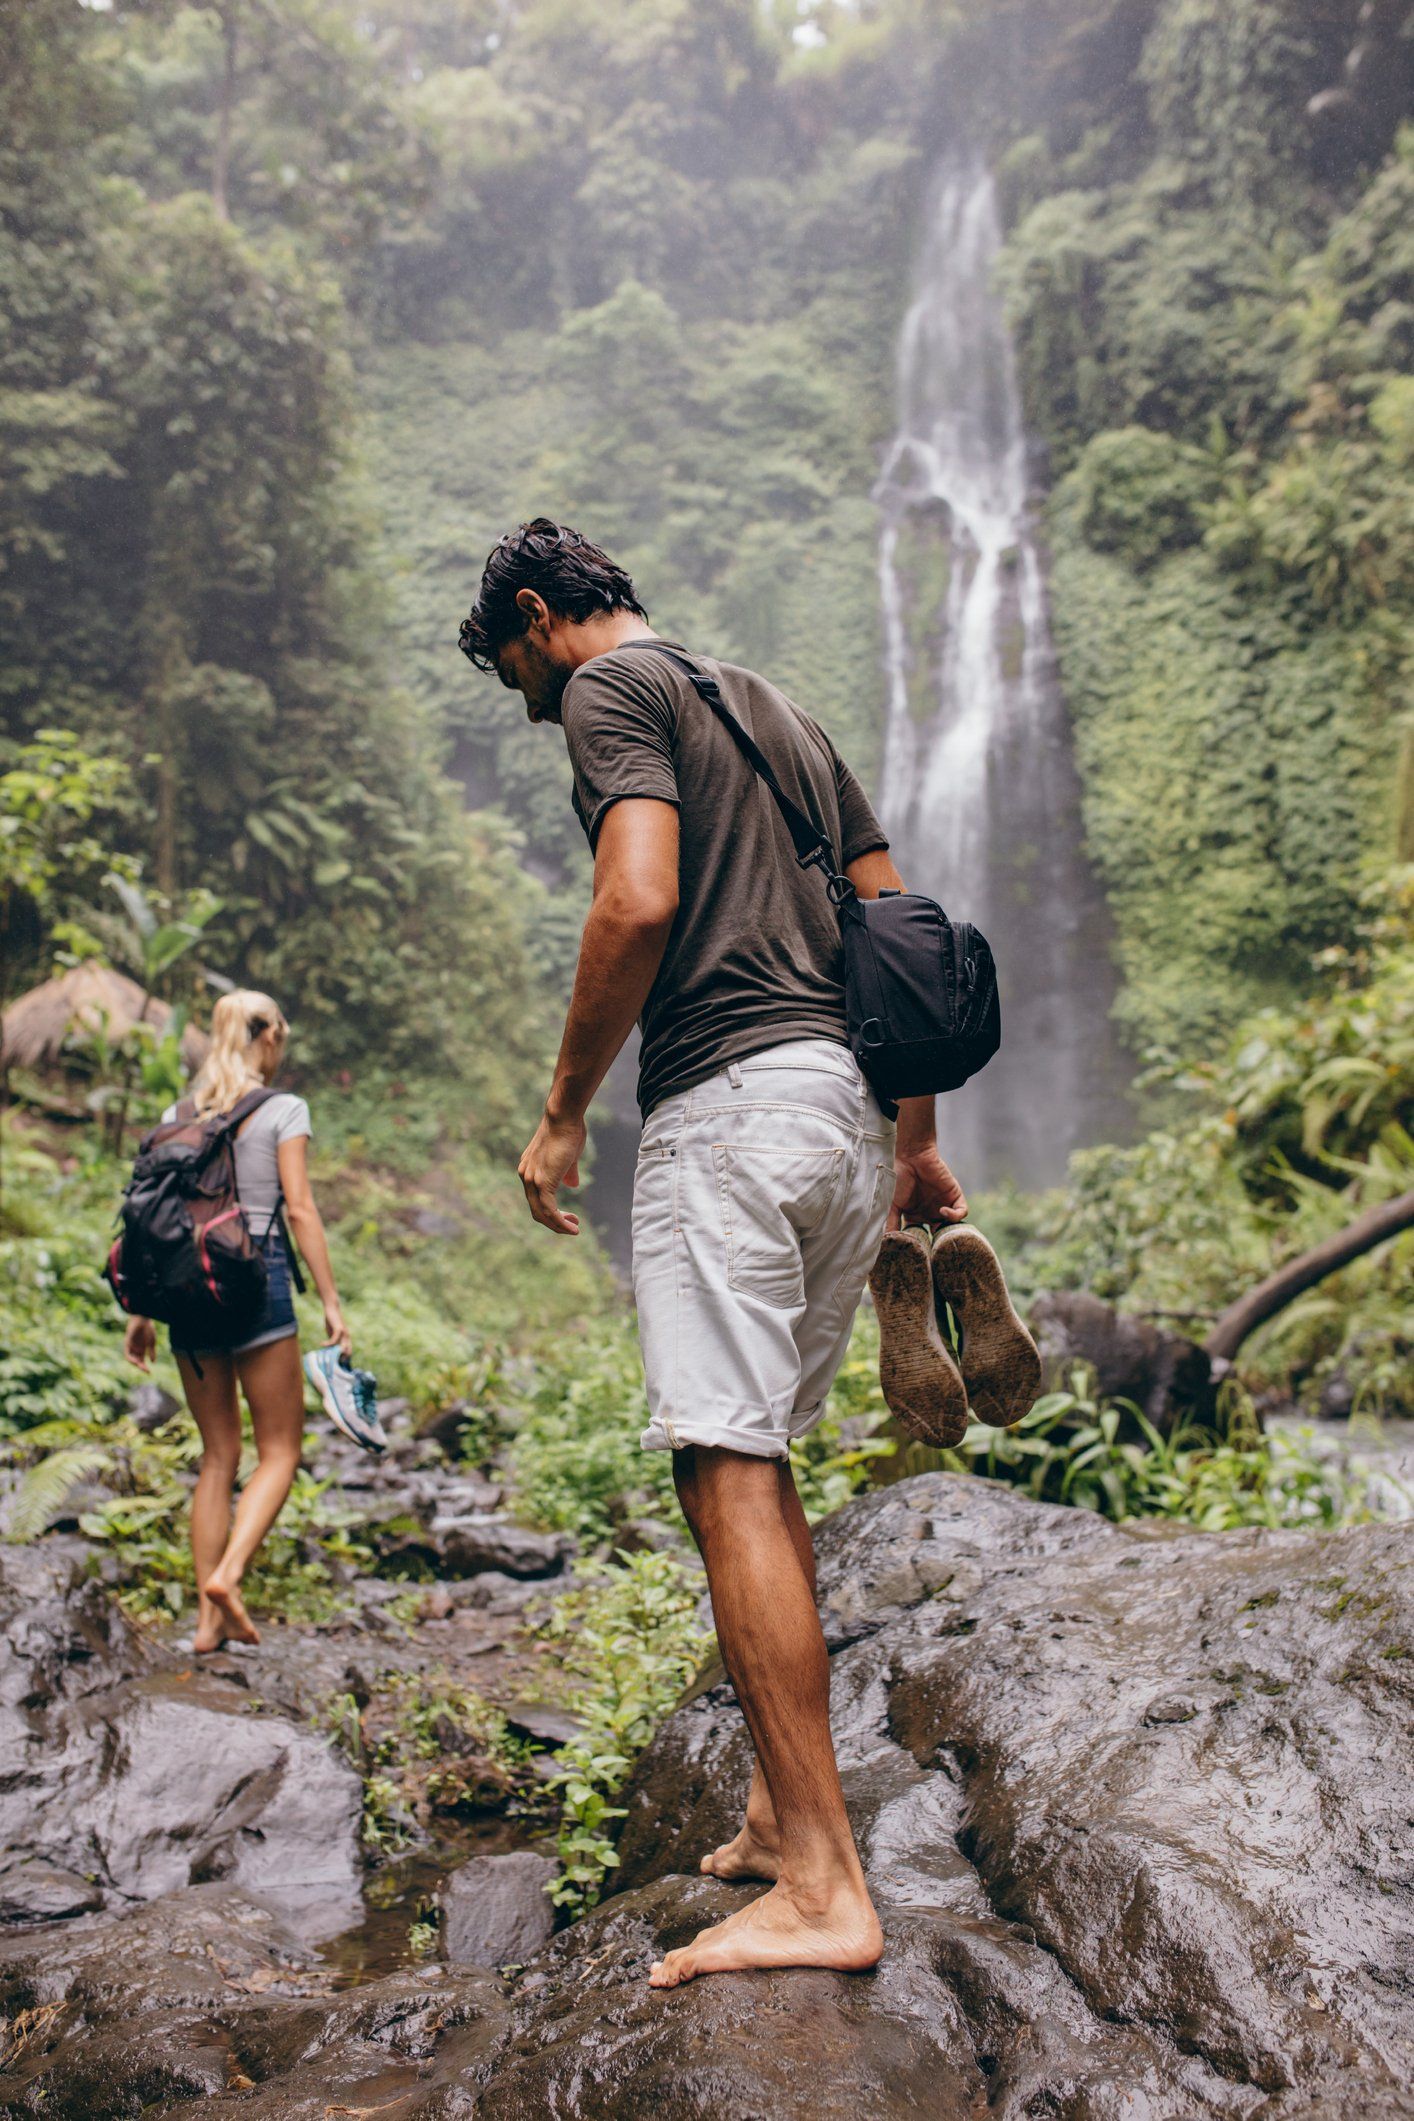 A man and a woman are hiking in the woods near a waterfall.